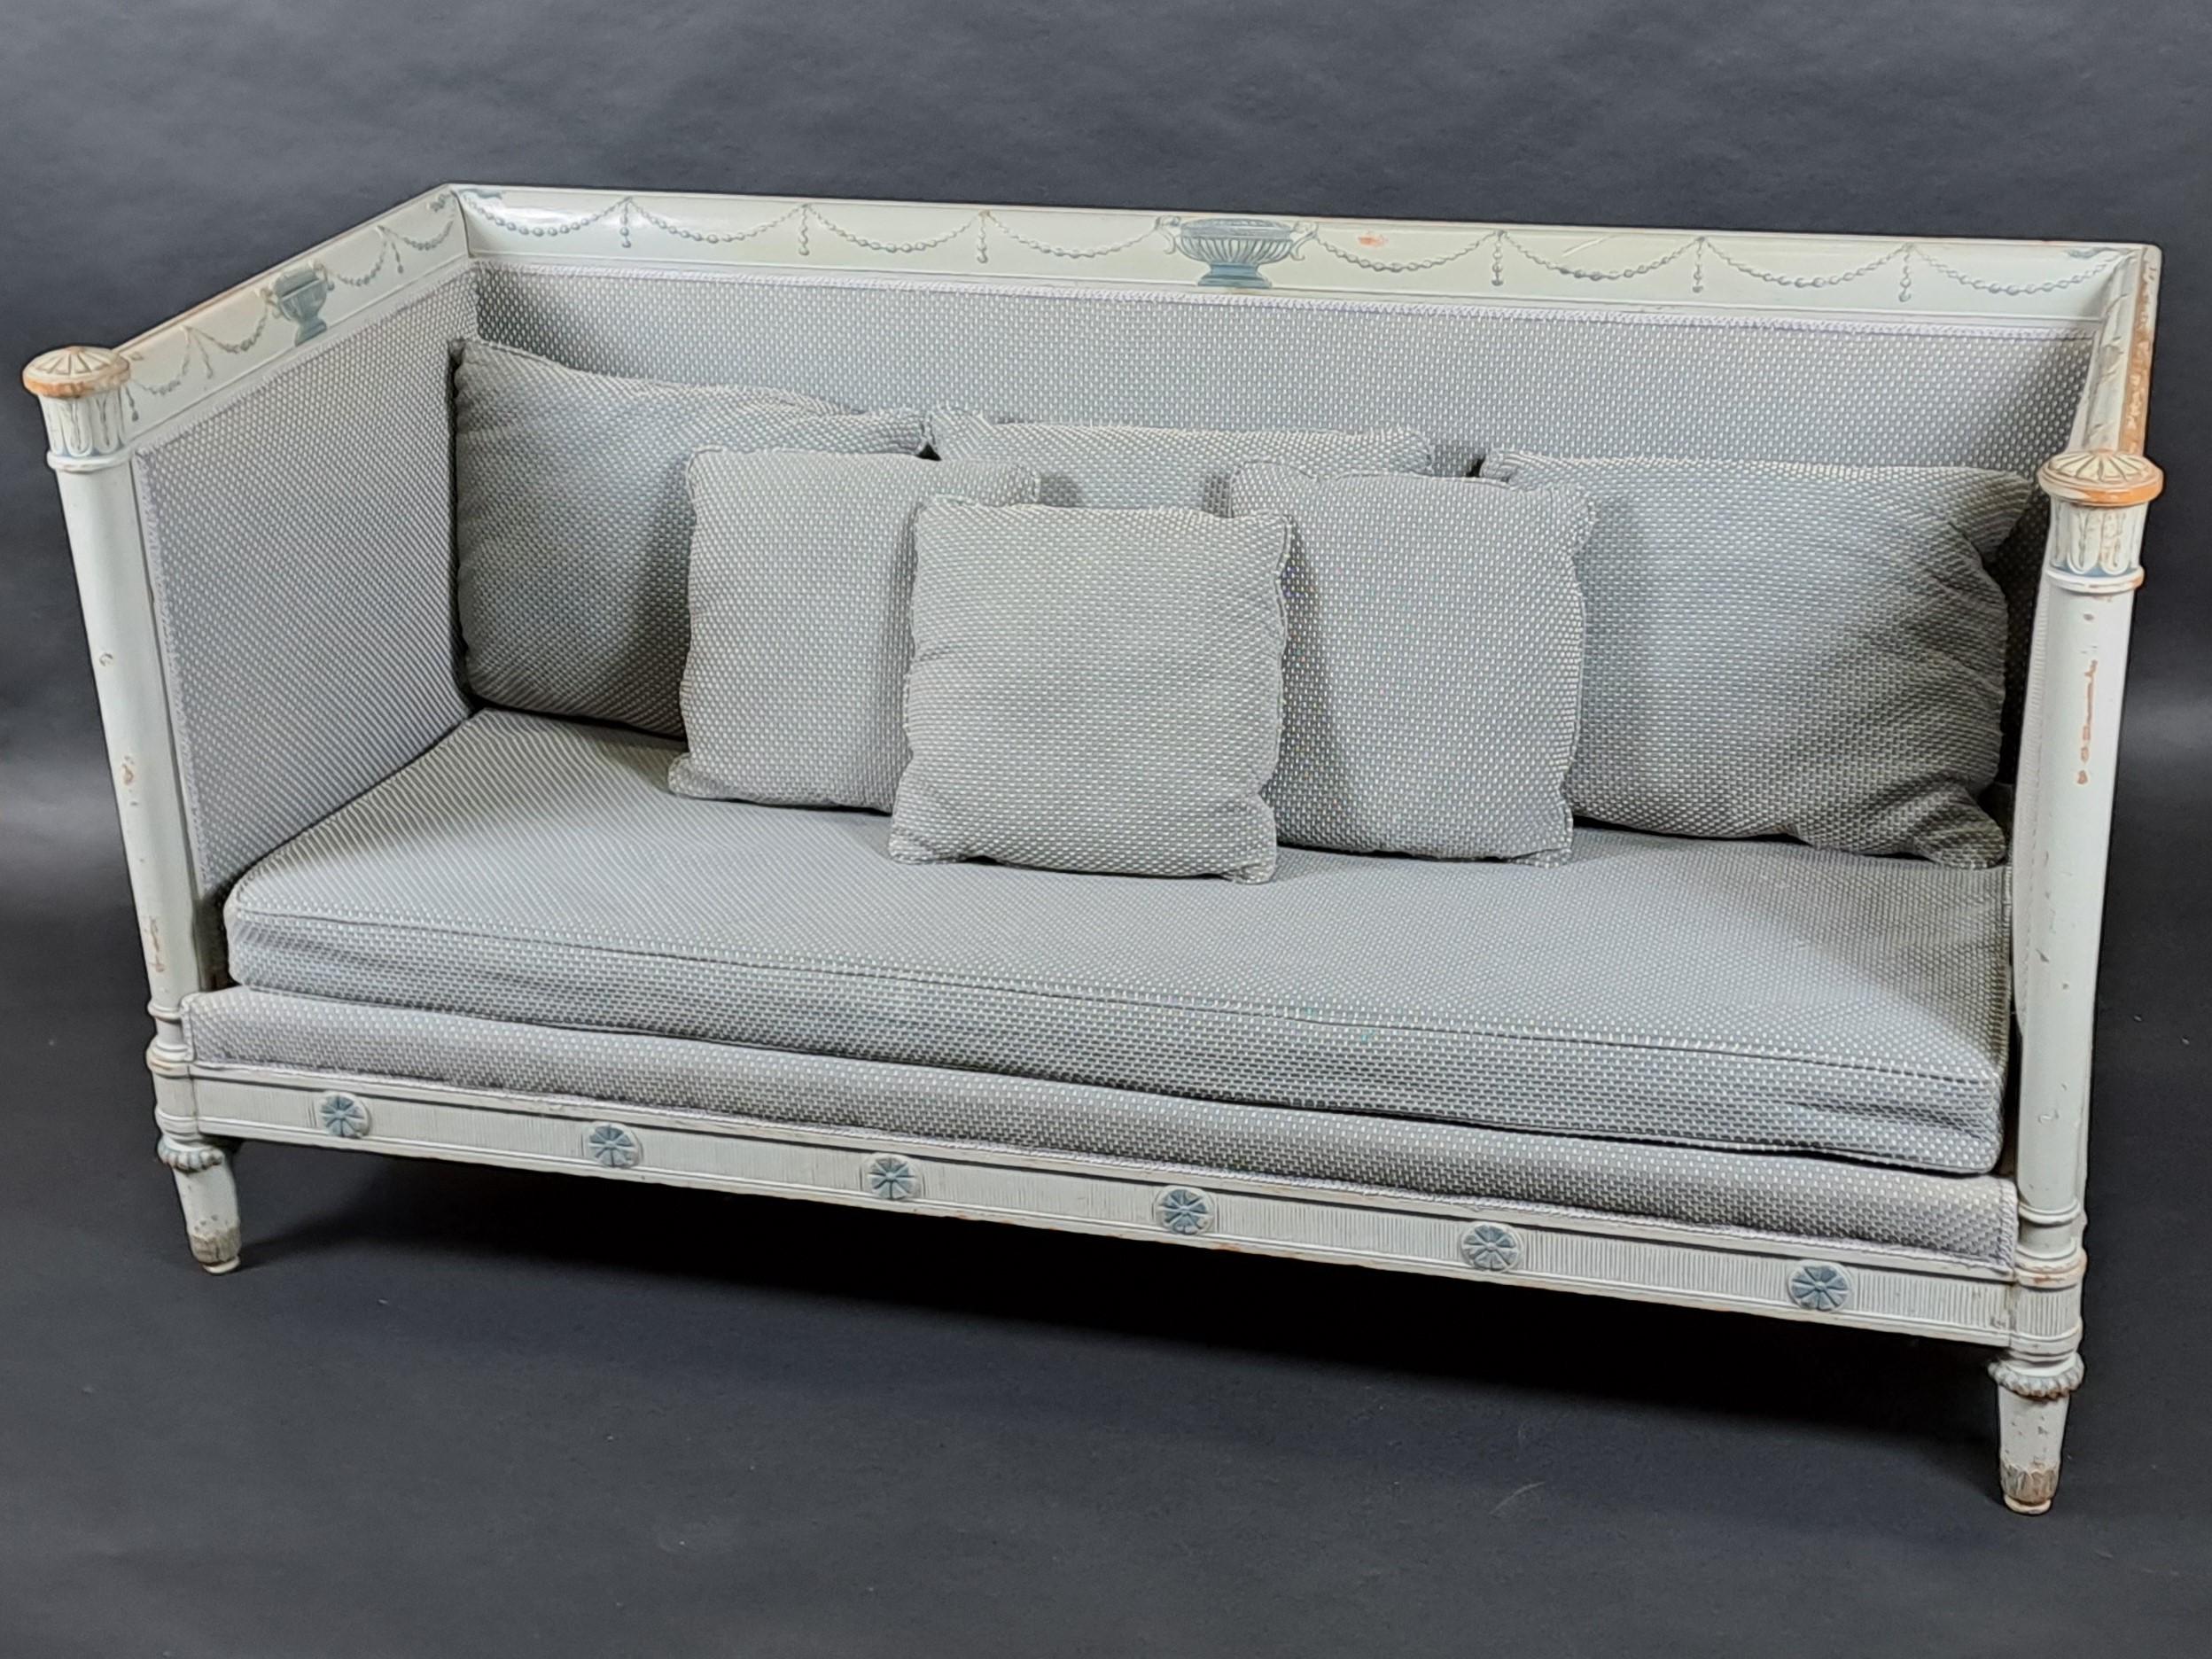 Beautiful sofa in gray lacquered wood with blue trim, finely carved with vases, pearl necklaces and other Directoire-inspired ornaments.

Gray damask fabric and six matching cushions.

French work of good quality around 1900.

Very good condition,